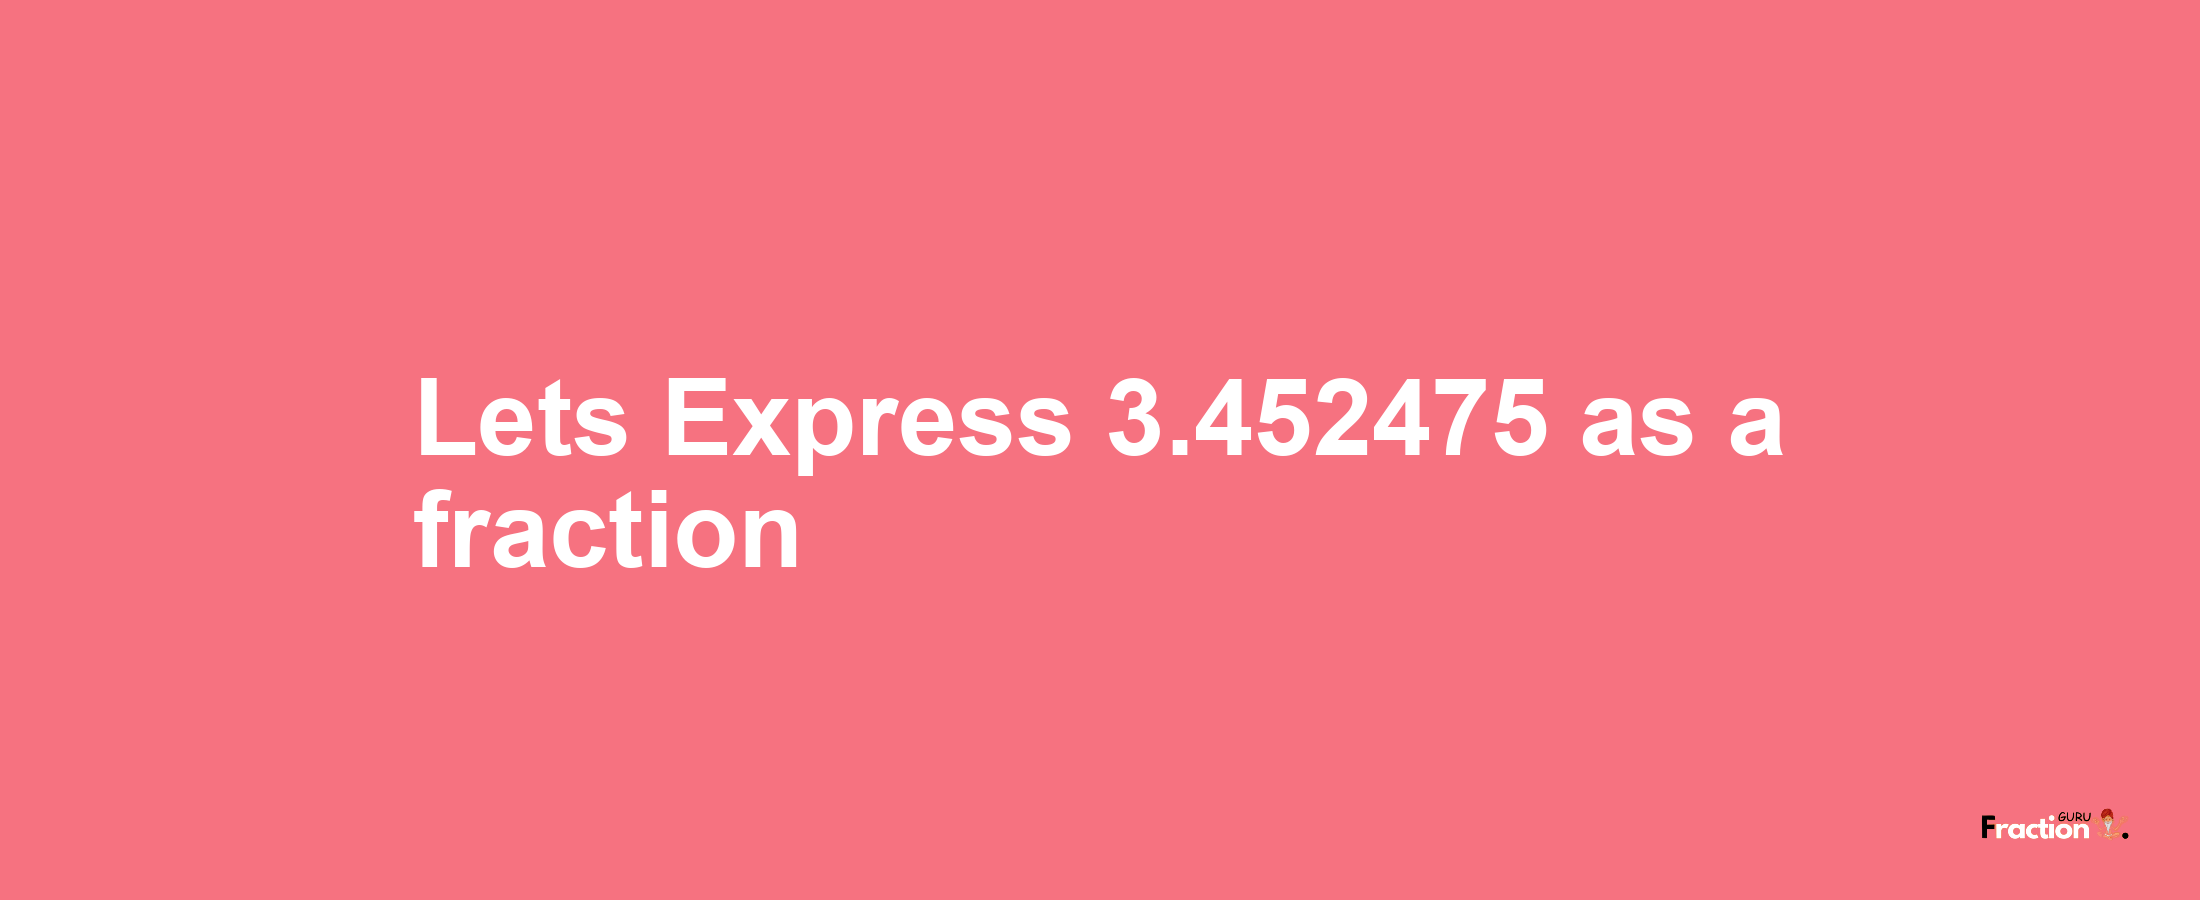 Lets Express 3.452475 as afraction